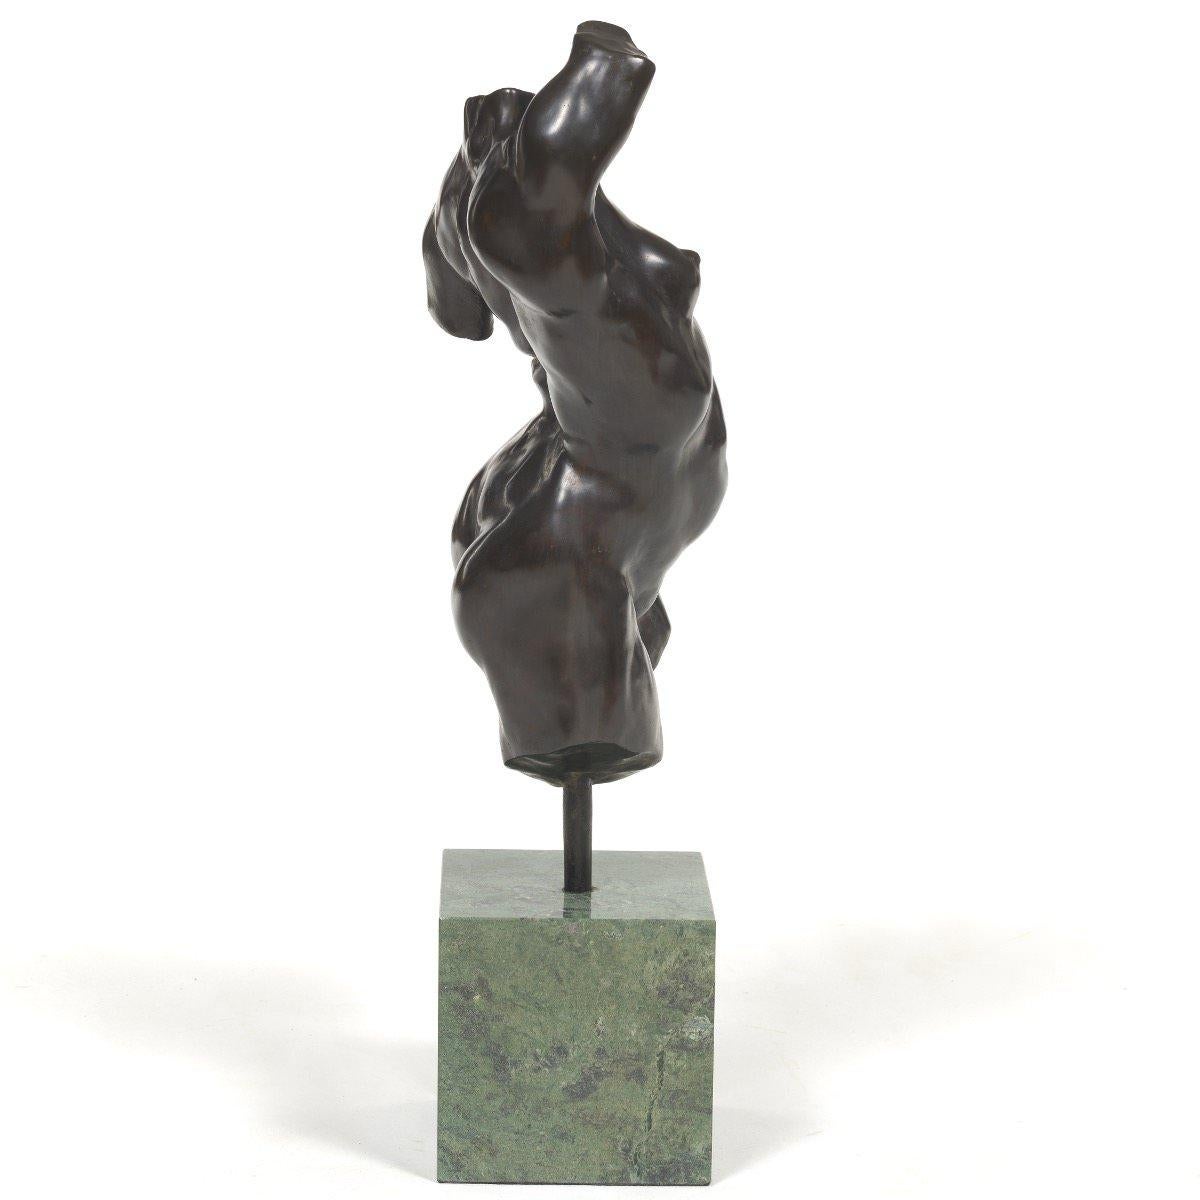 Alan Cottrill (American, Ohio, b. 1952)
Nude Female Torso, 1994
Bronze mounted to green marble base
Signed, dated and numbered 14/20 verso of leg, with foundry stamp
17. in. h. x 6 in. w. x 6 in. d.
25.5 in. h. x 6 in. w. x 6 in. d., with base

Alan